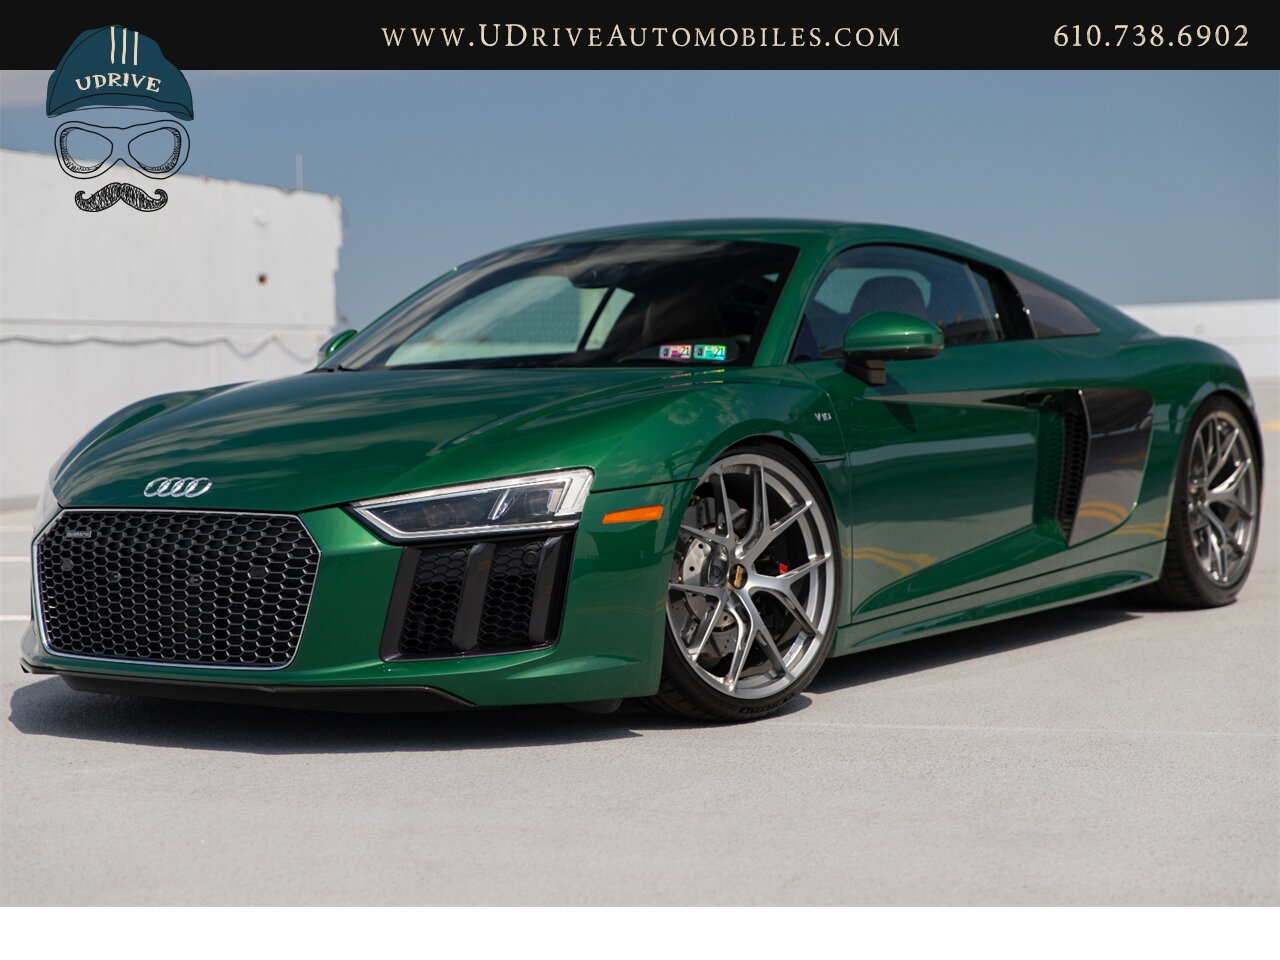 2017 Audi R8 Audi Exclusive Avocado Green Vermont Brown Leather  Diamond Stitching V10 Carbon Fiber - Photo 1 - West Chester, PA 19382